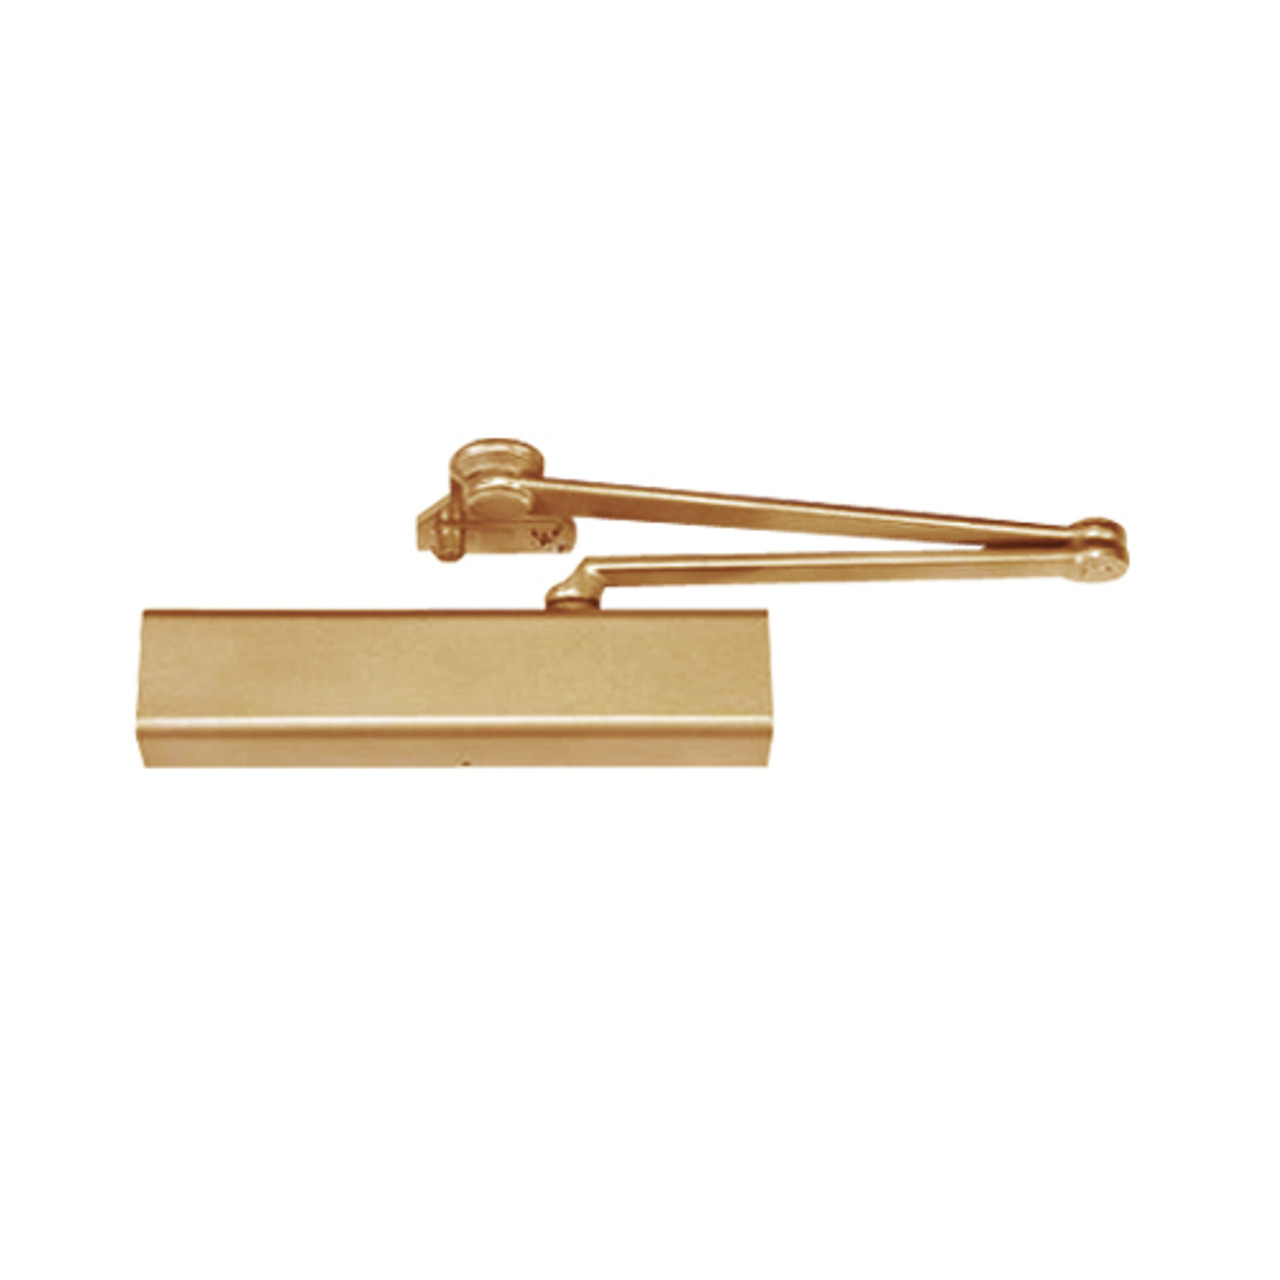 CLP8501A-691 Norton 8000 Series Full Cover Non-Hold Open Door Closers with CloserPlus Arm in Dull Bronze Finish